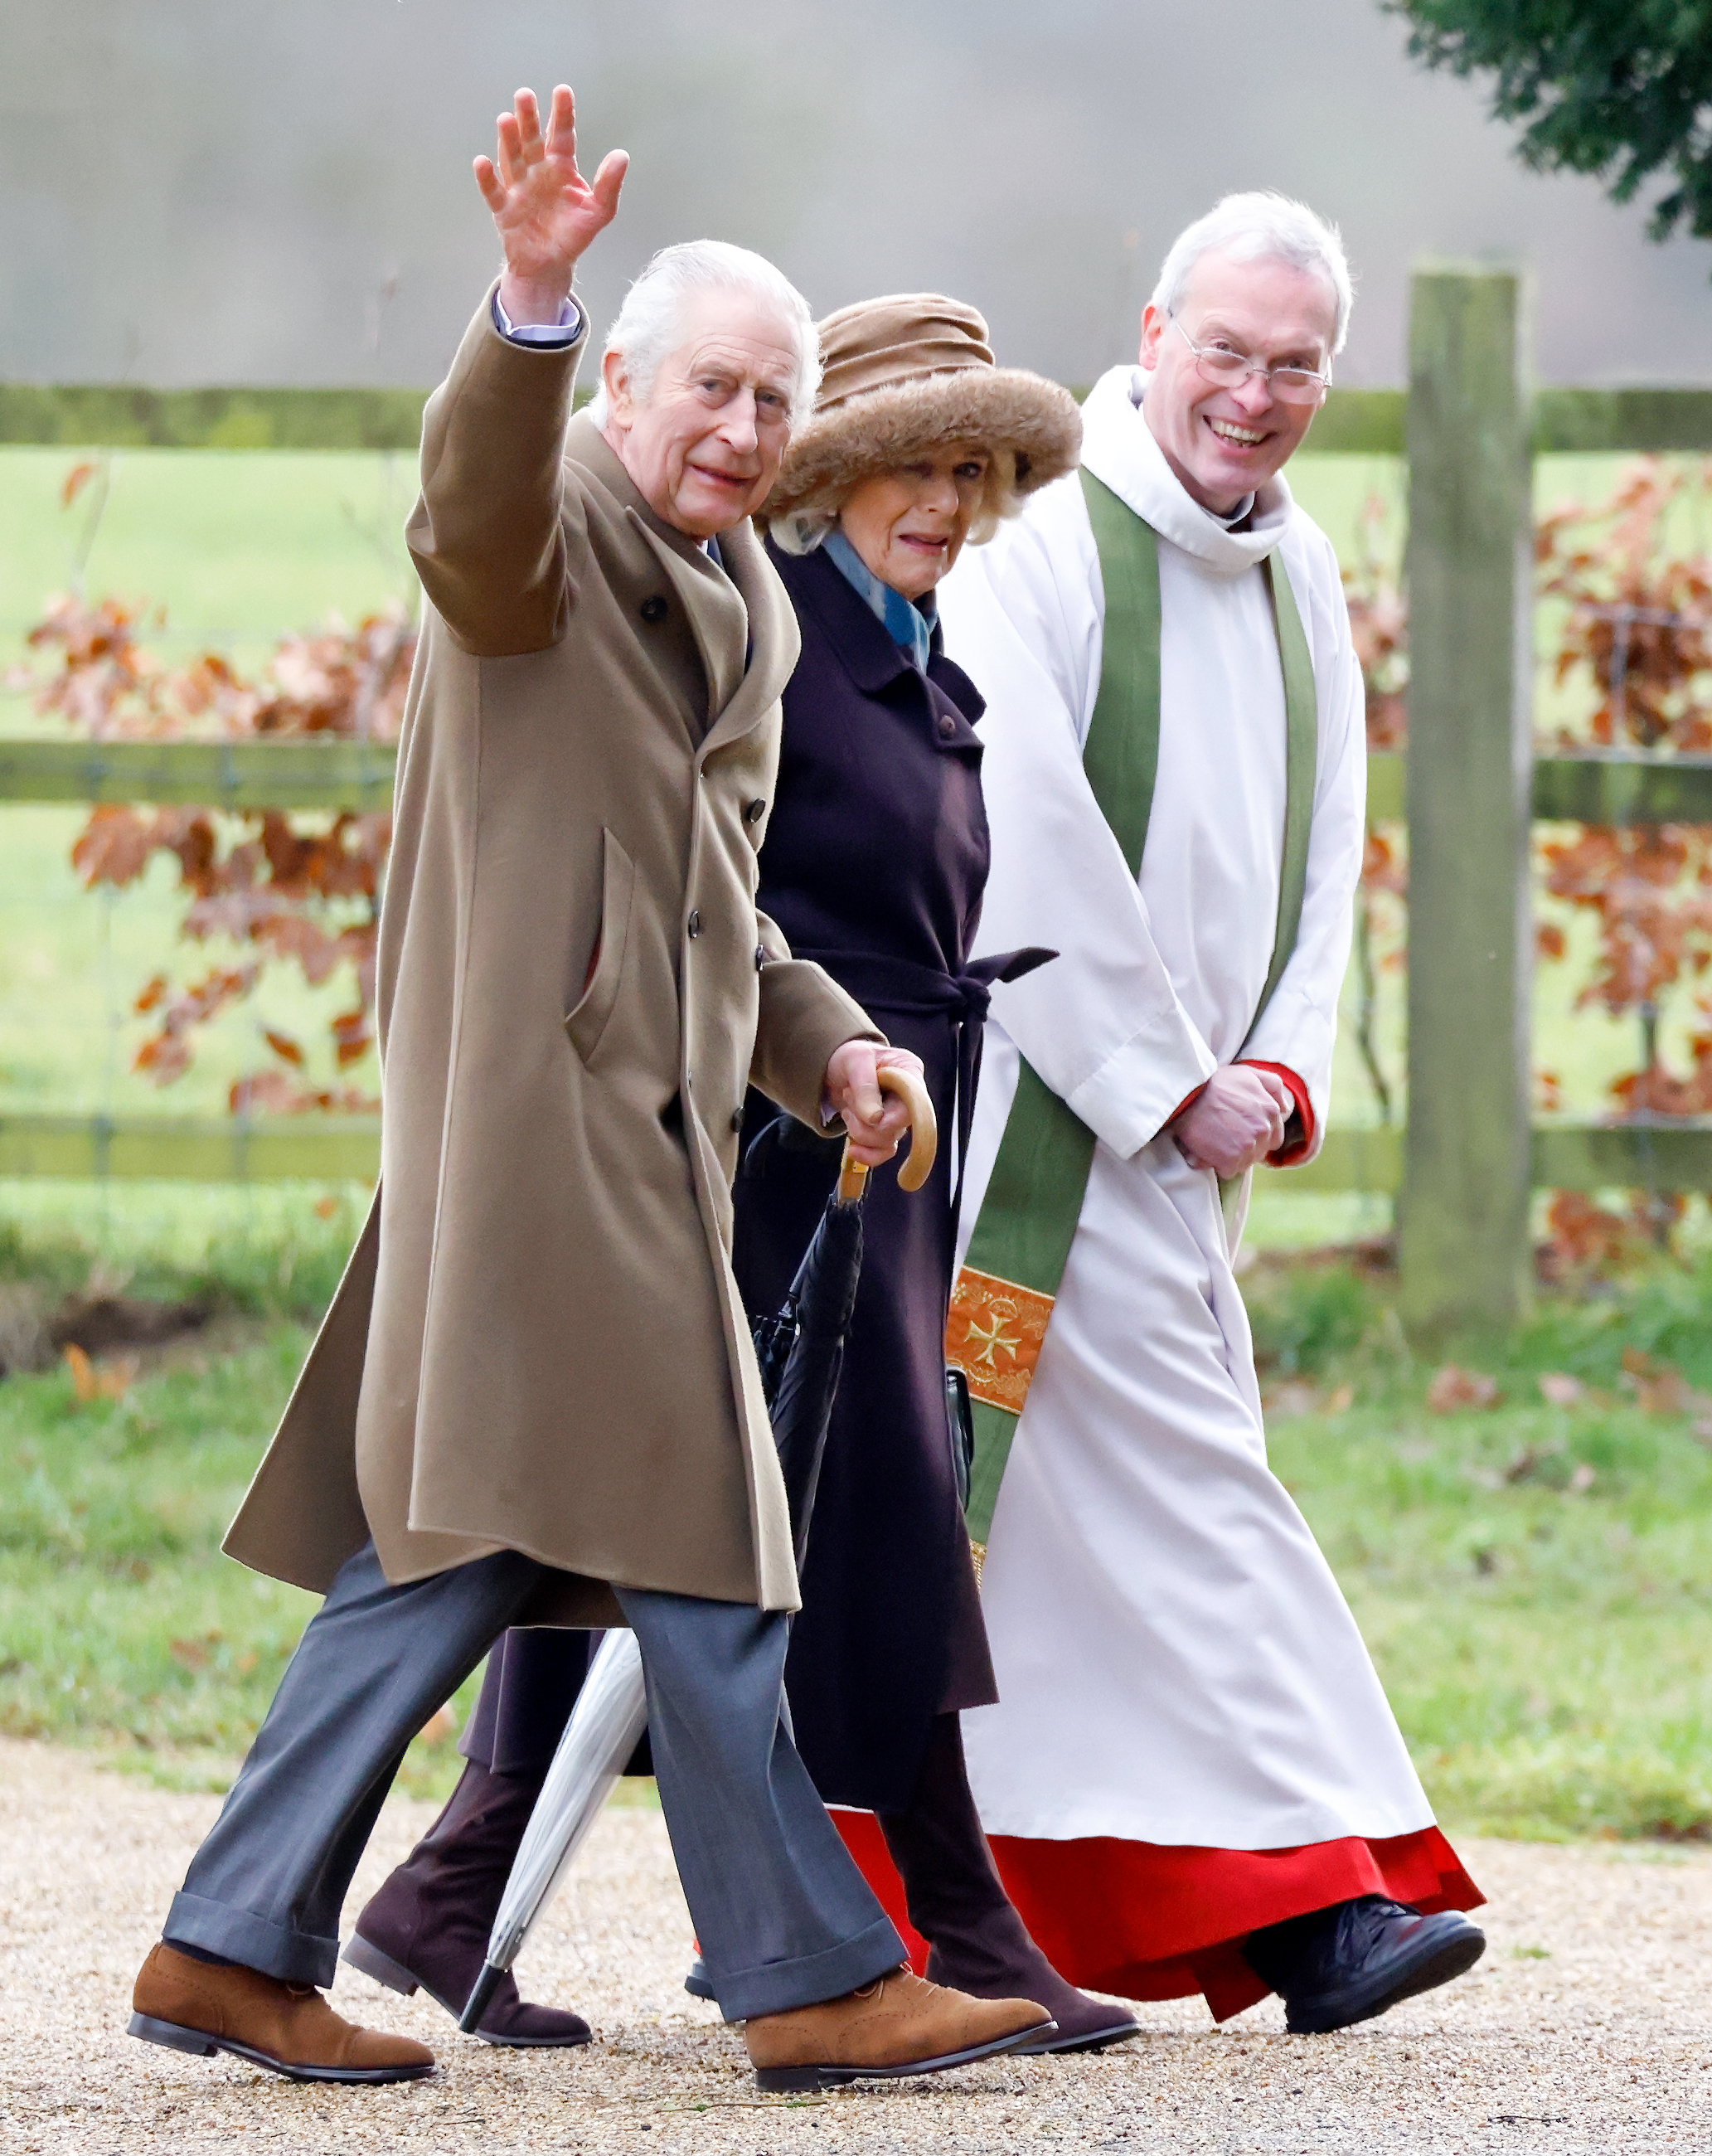 King Charles III and Queen Camilla, accompanied by The Reverend Canon Dr Paul Williams, attend the Sunday service at the Church of St Mary Magdalene in Sandringham, England on February 4, 2024. | Source: Getty Images